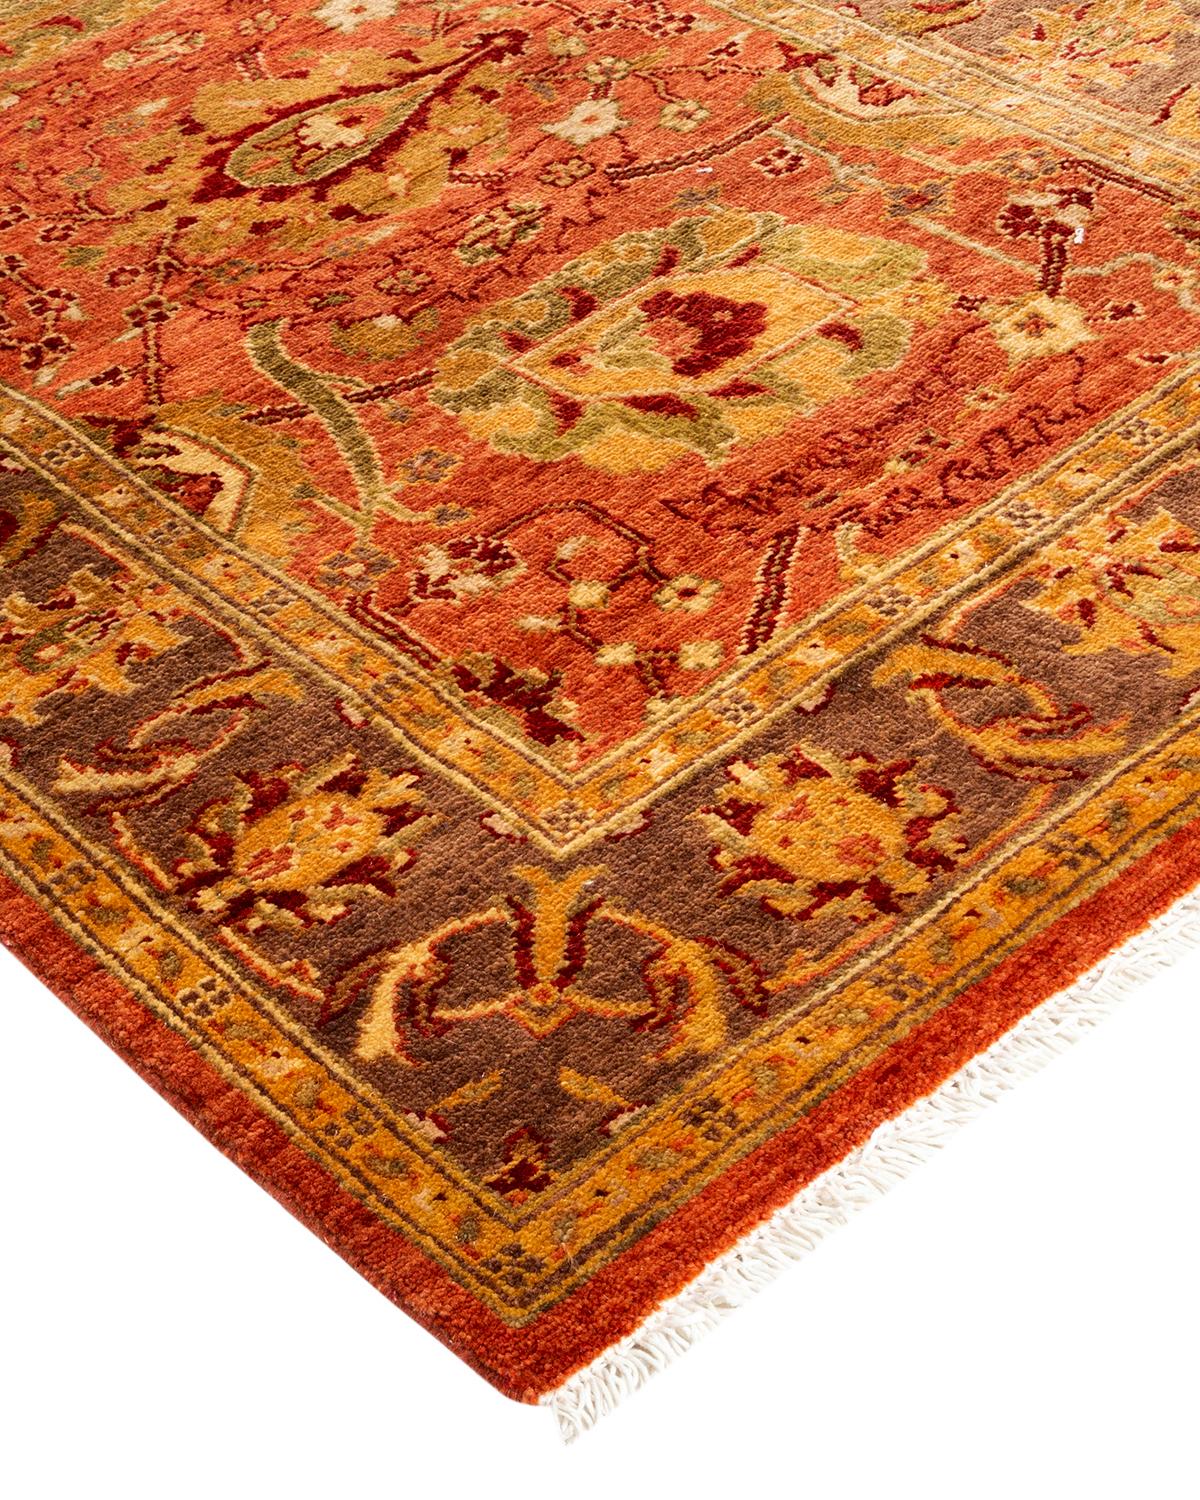 Persian rug-making at its finest inspired the rich colors, elaborate geometric motifs, and botanical detailing of the Serapi collection. With as many as 100 knots per inch, these handcrafted rugs are as durable as they are visually stunning, and